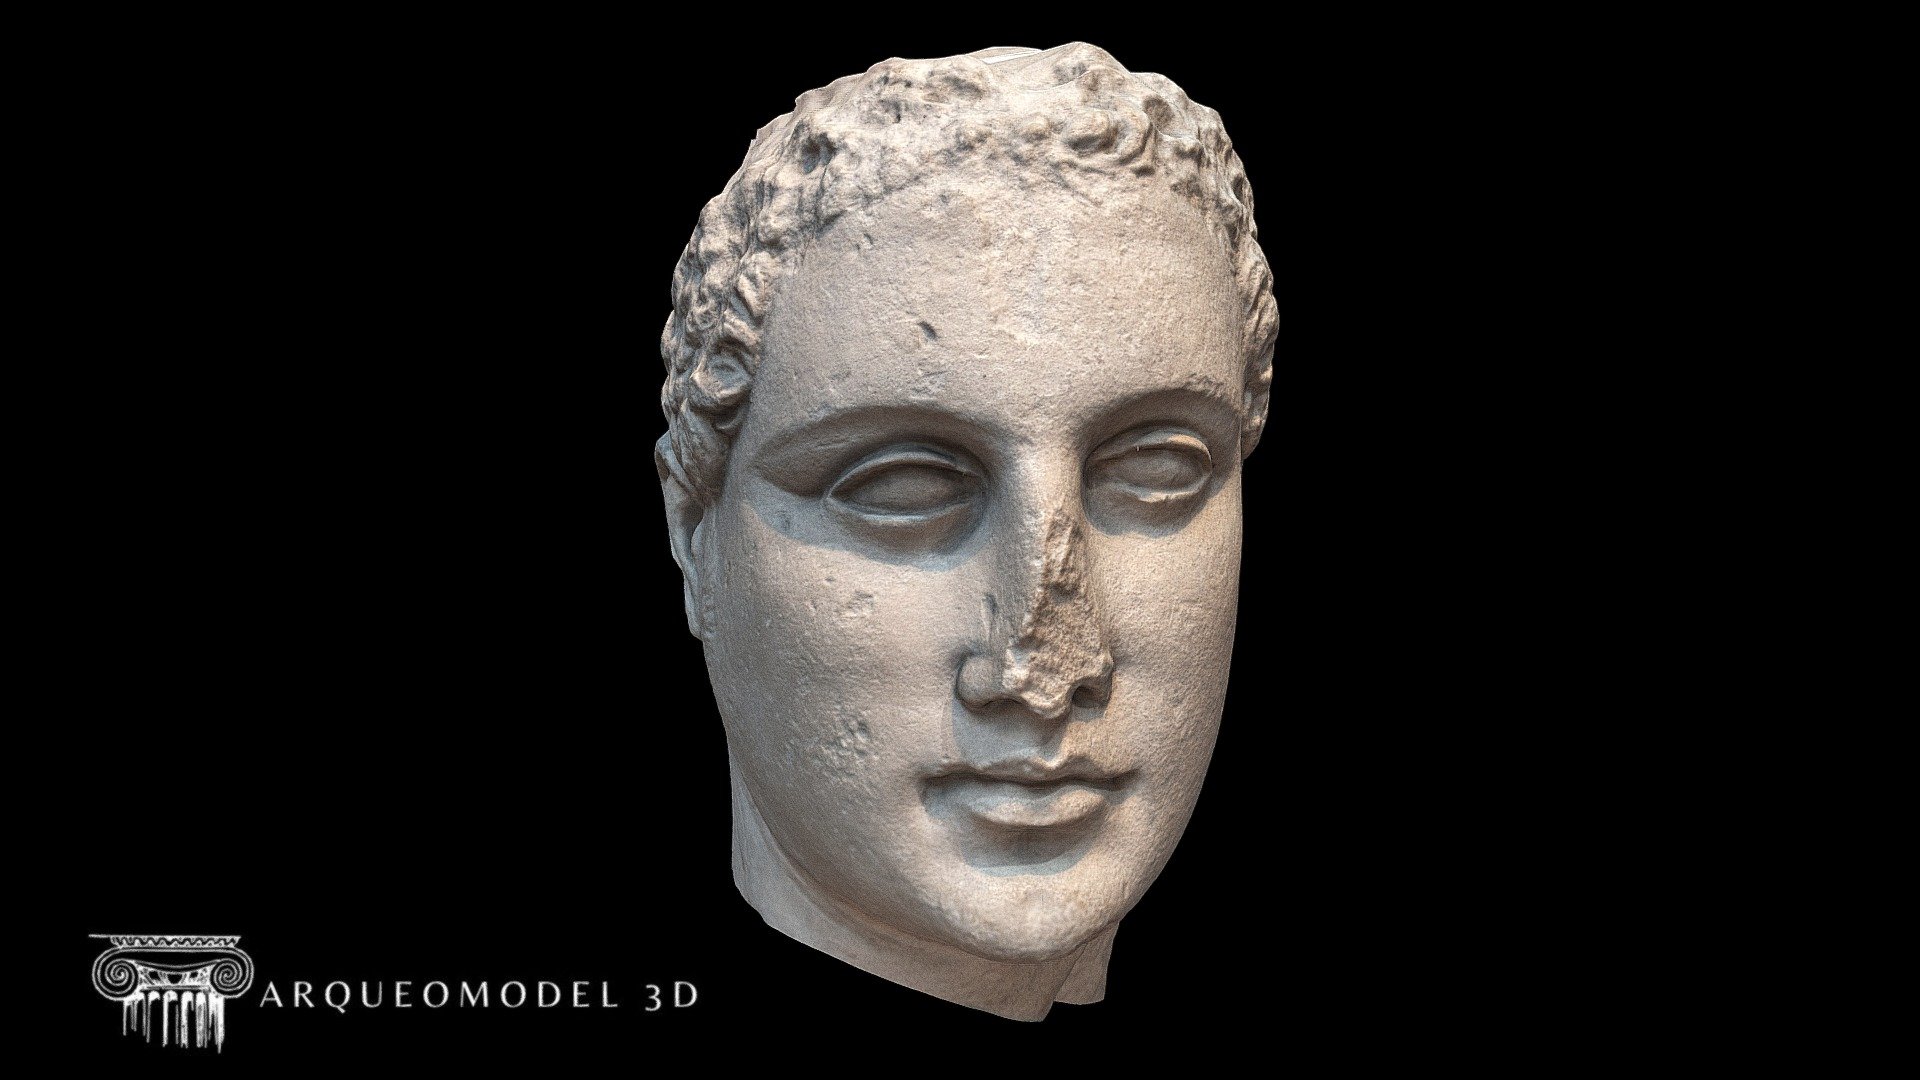 Later hellenistic statues on Cyprus display greater realism, as indicated here by the flshy face, ruffled hair and sideburns. Although resembling the features of Ptolemy VI of Egypt (180-145 BC), this colossal head is probably a generic image of an aristocratic worshipper rather than a portrait of the ruler of Cyprus at this time. It combines broader Hellenistic style with local carving traditions typical of the Dali area where it was found 3d model